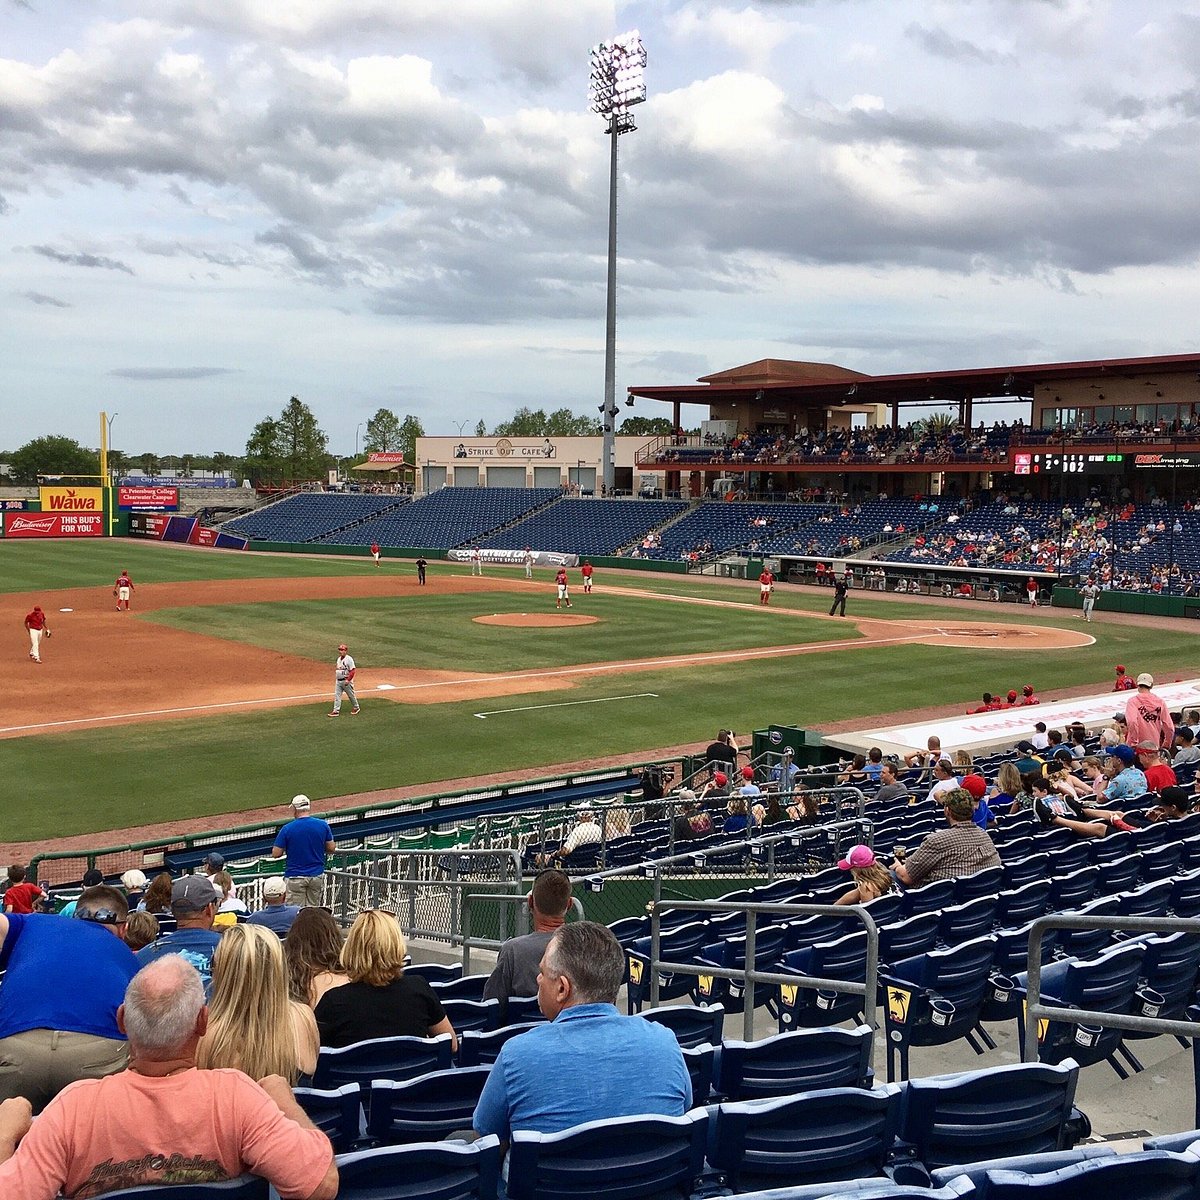 Four Clearwater Threshers named to All-Star team, Clearwater